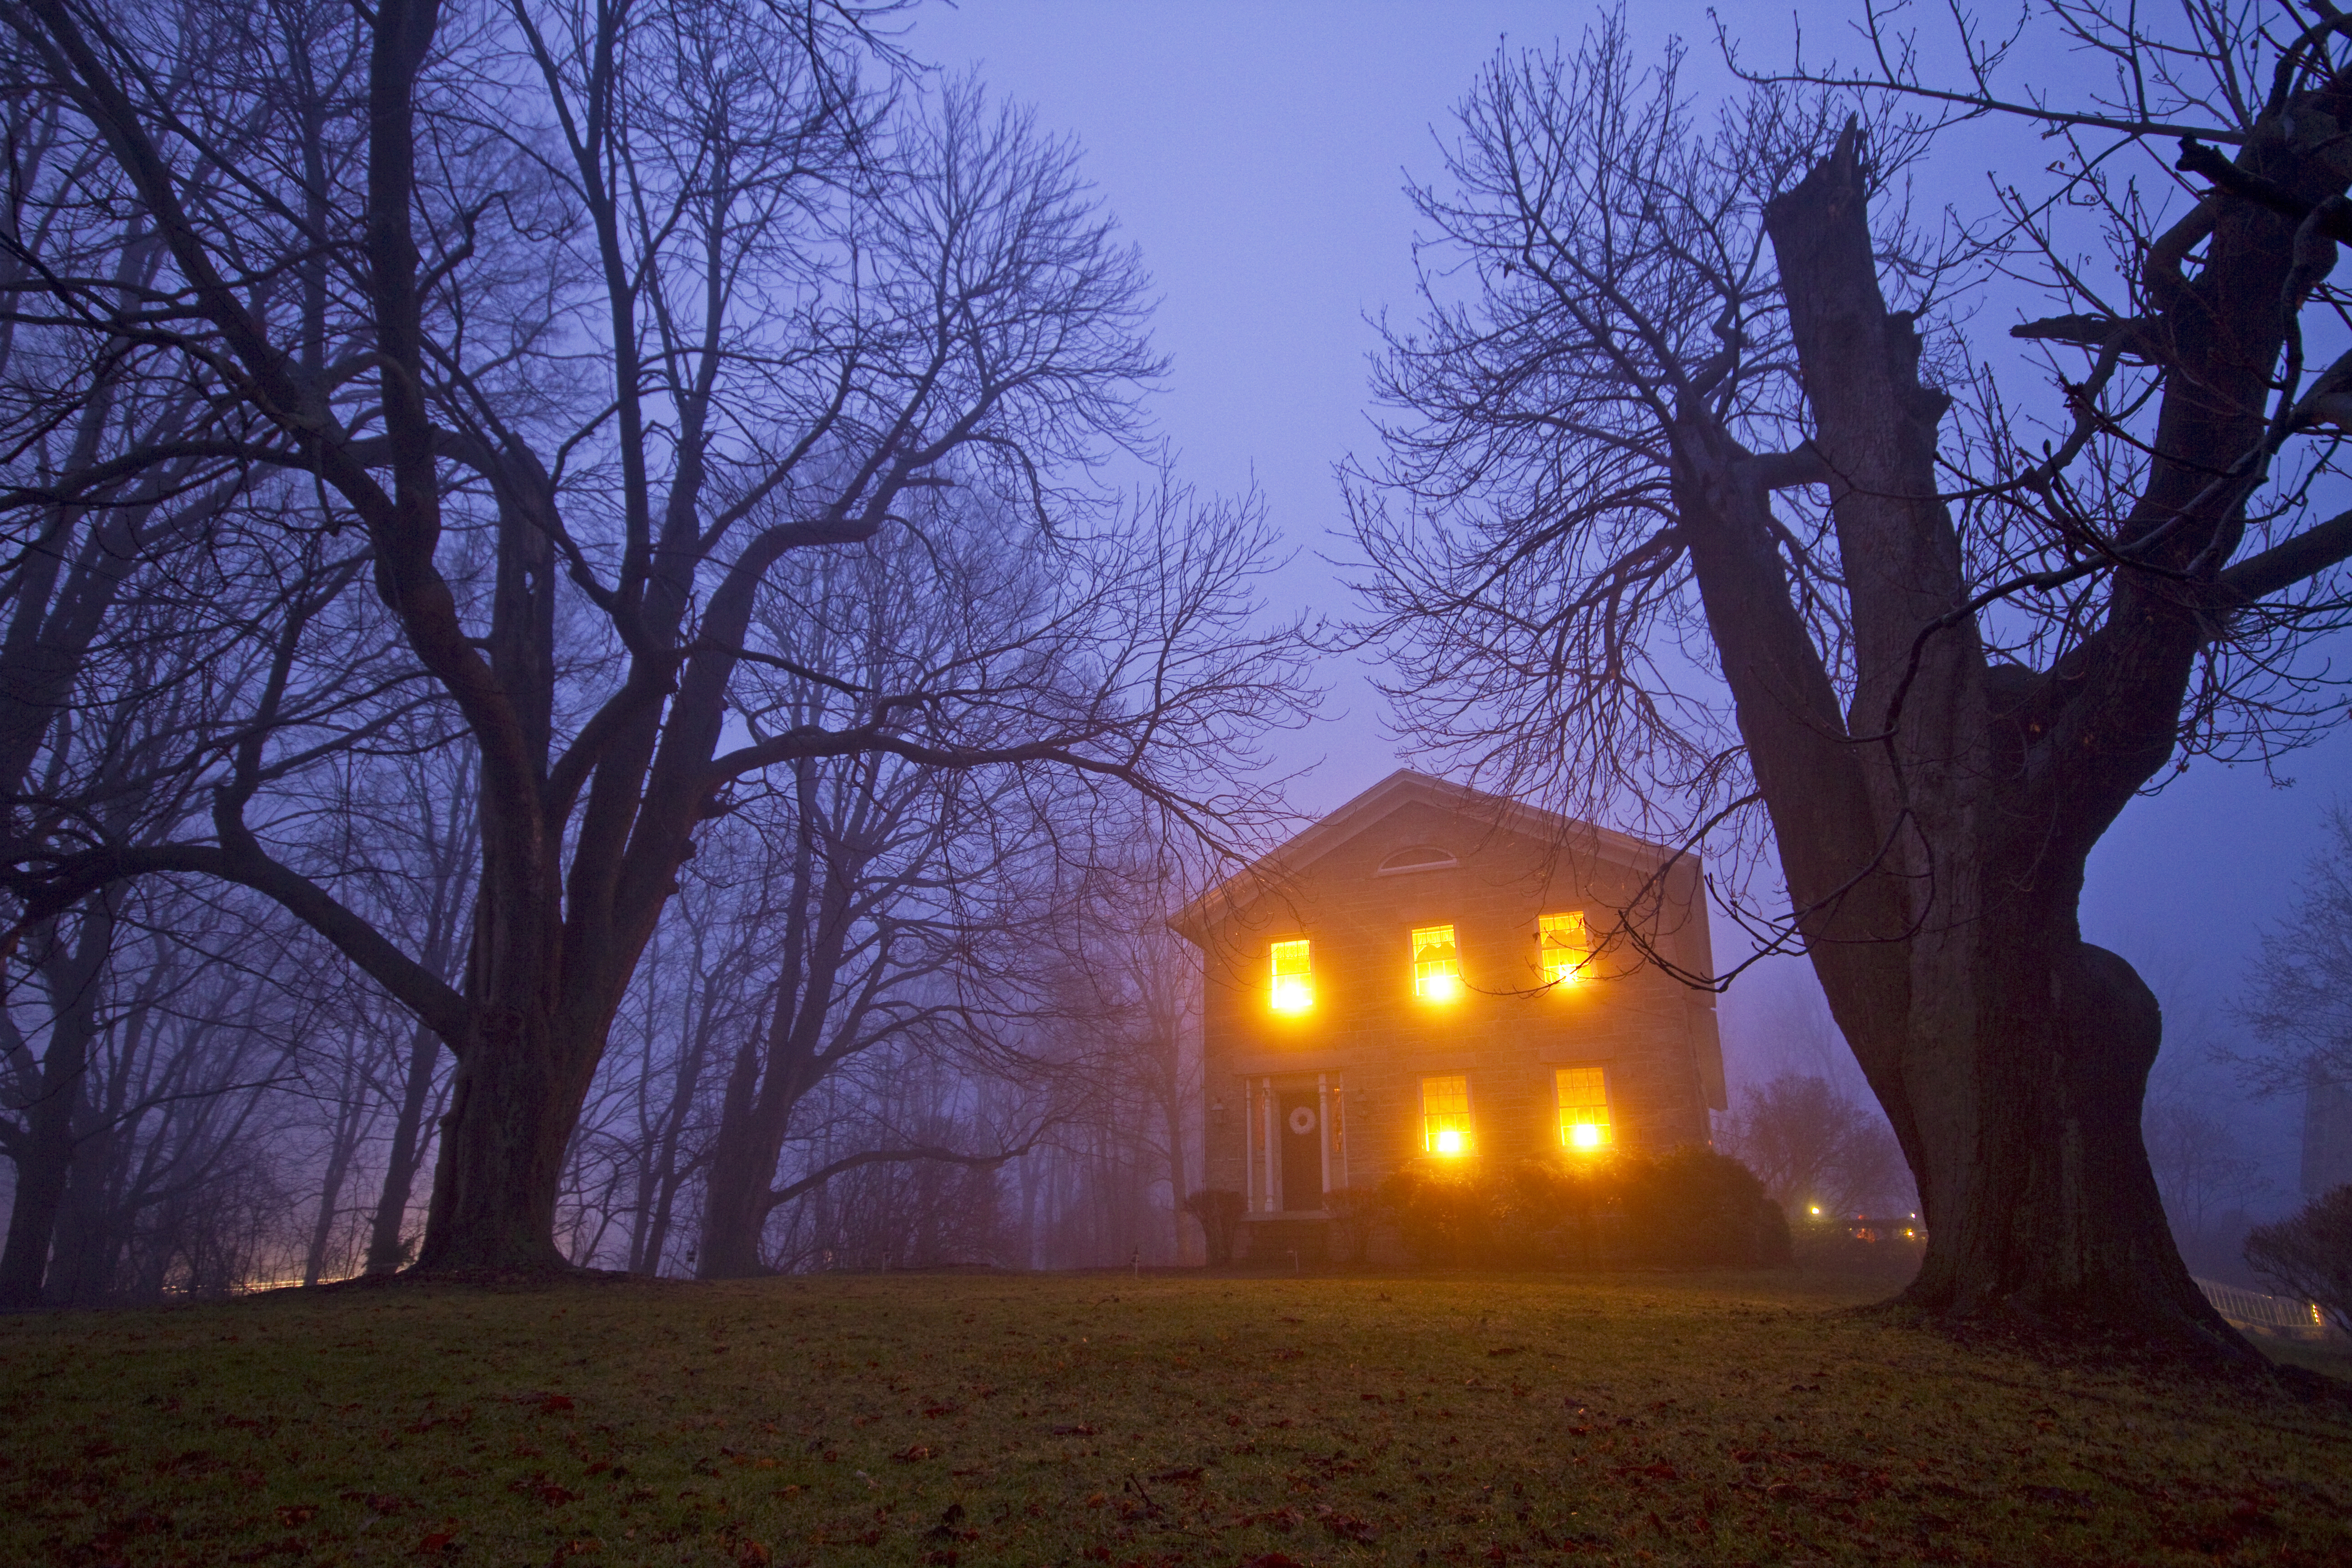 A scary-looking house in the woods